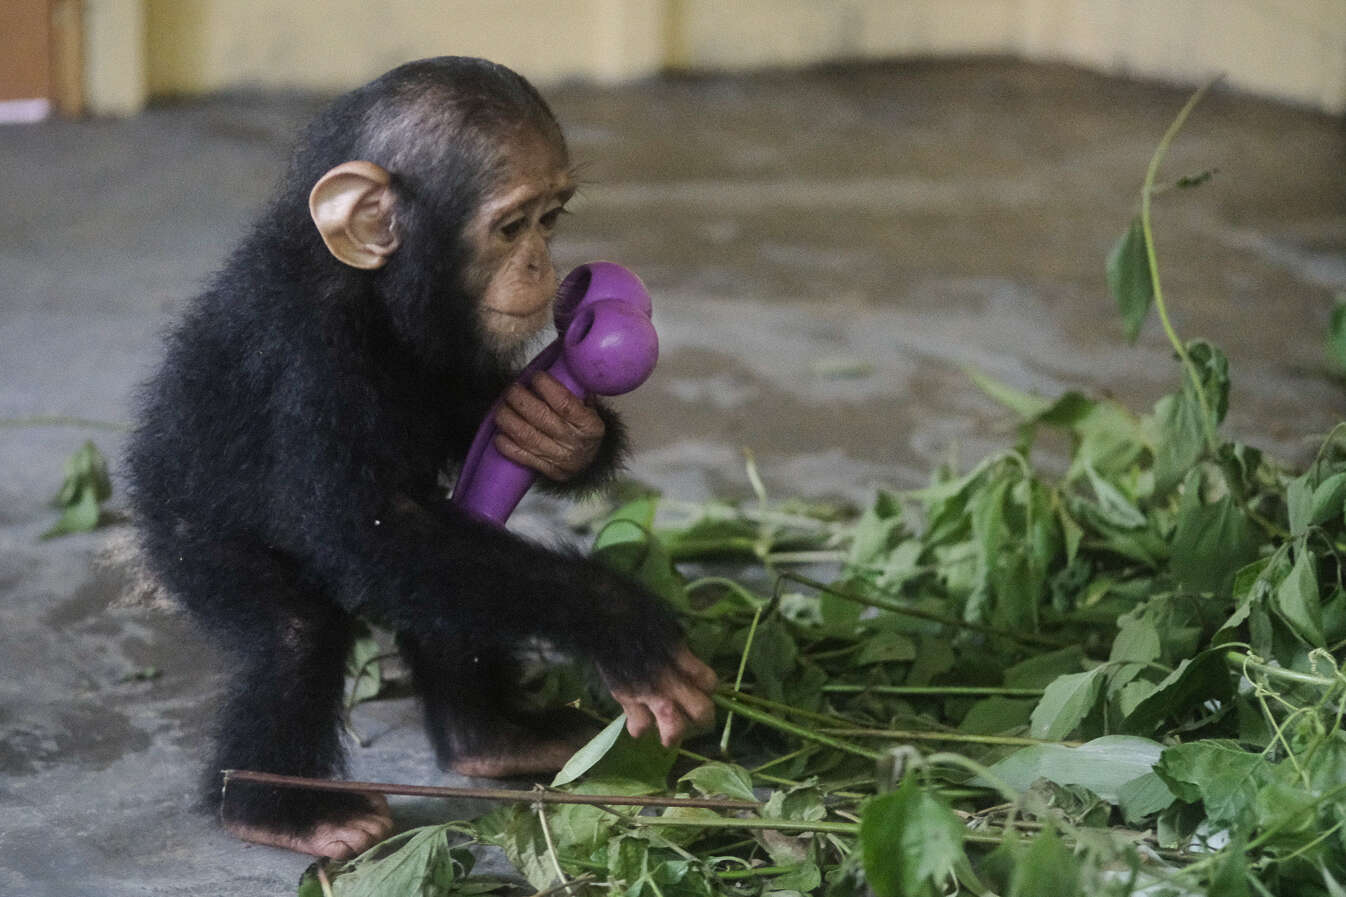 Rescued chimp playing with leaves